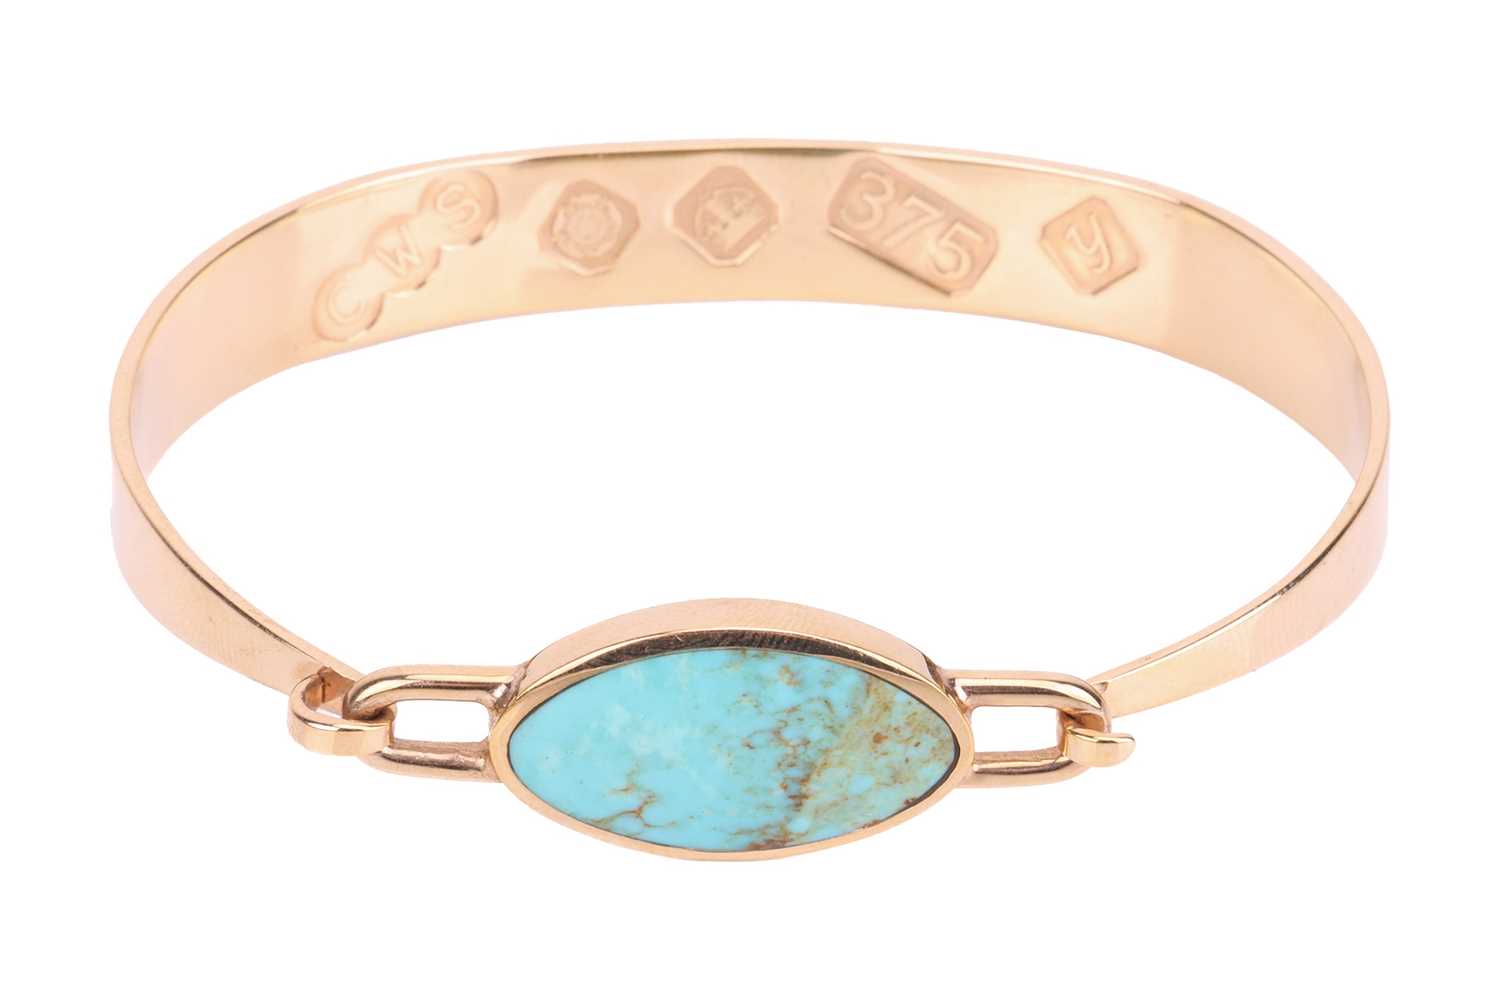 A turquoise-set bangle in 9ct yellow gold, tension clamp opening bracelet featuring a navette-shaped - Image 3 of 5